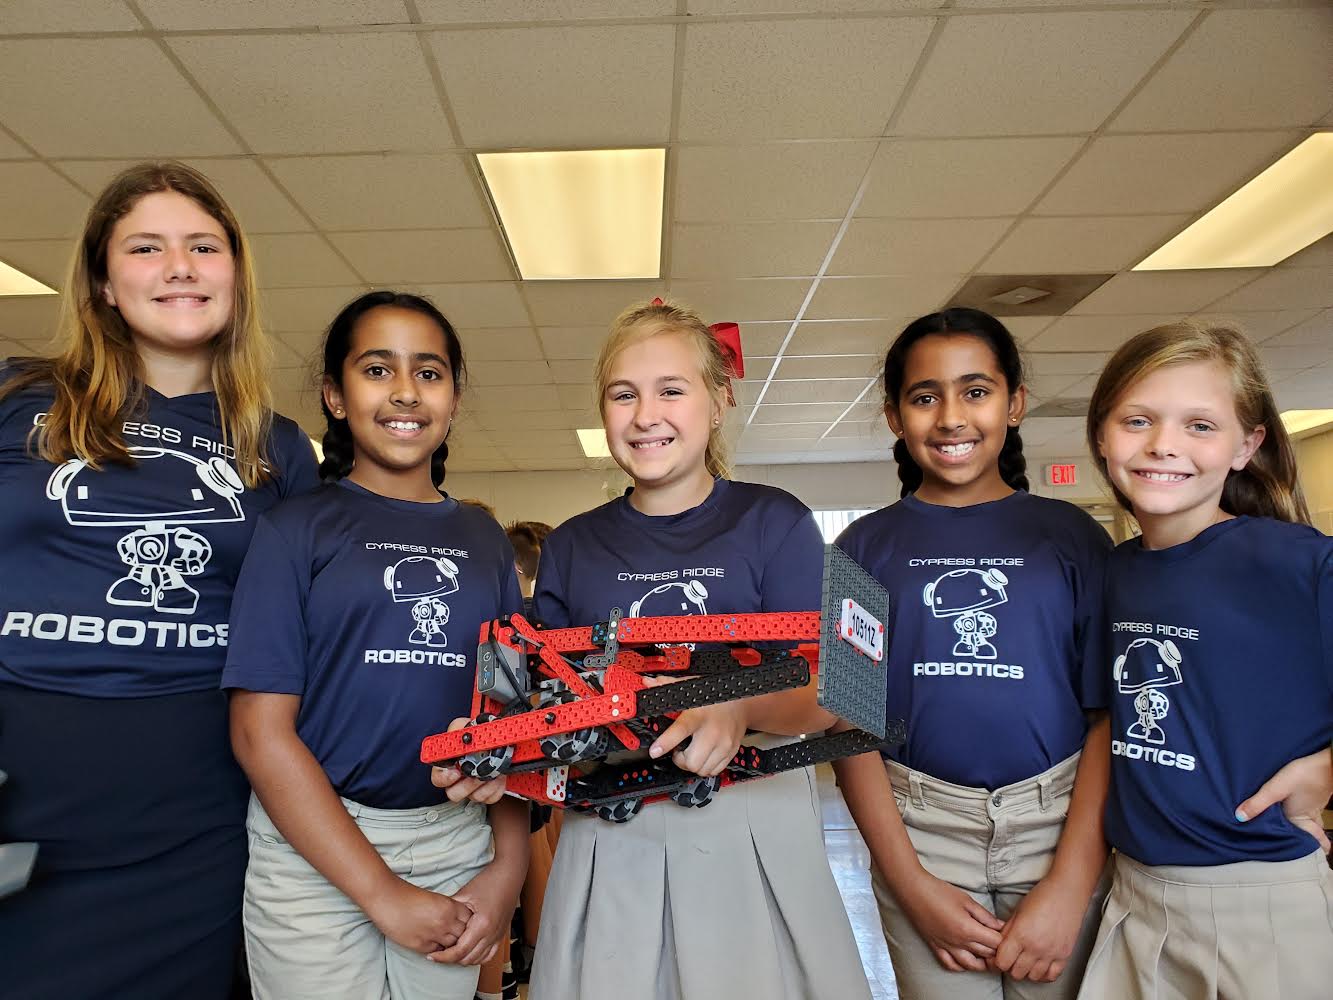 Level Up Automation donates $1,200 for all girls robotics team to compete in World Championships